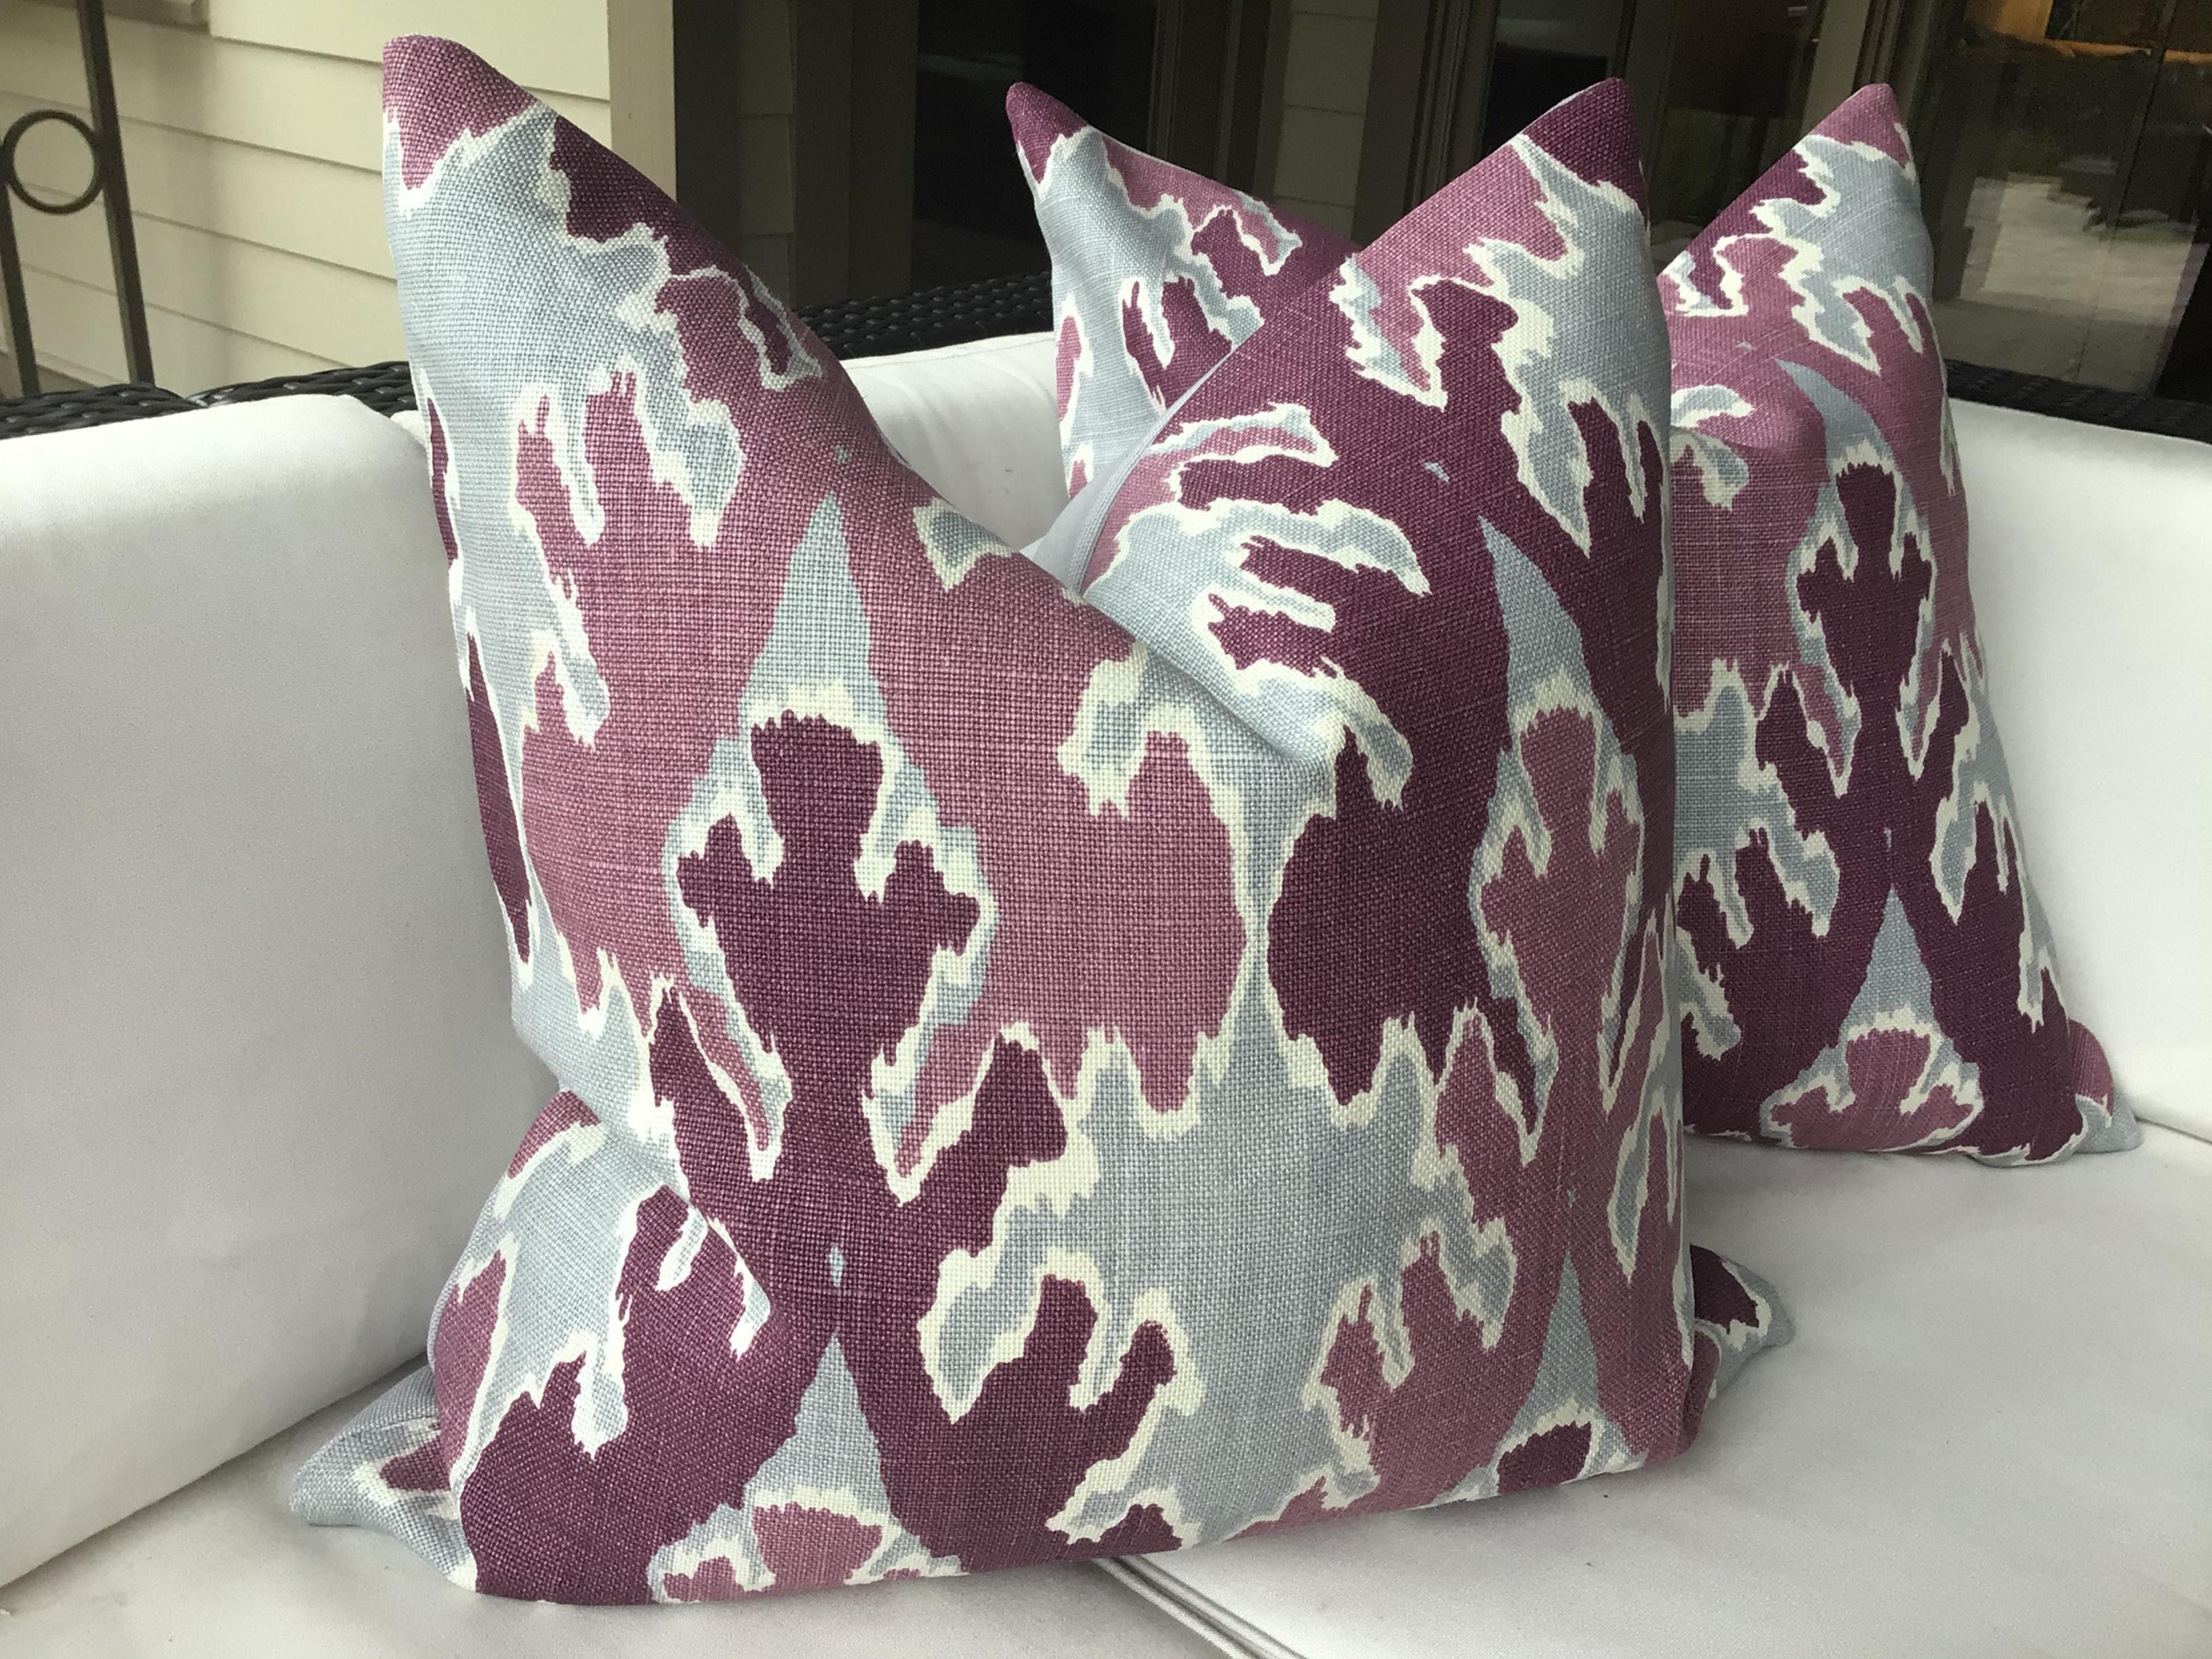 American Lee Jofa Bengal Bazaar Magenta and Gray Down Filled Pillows - a Pair For Sale